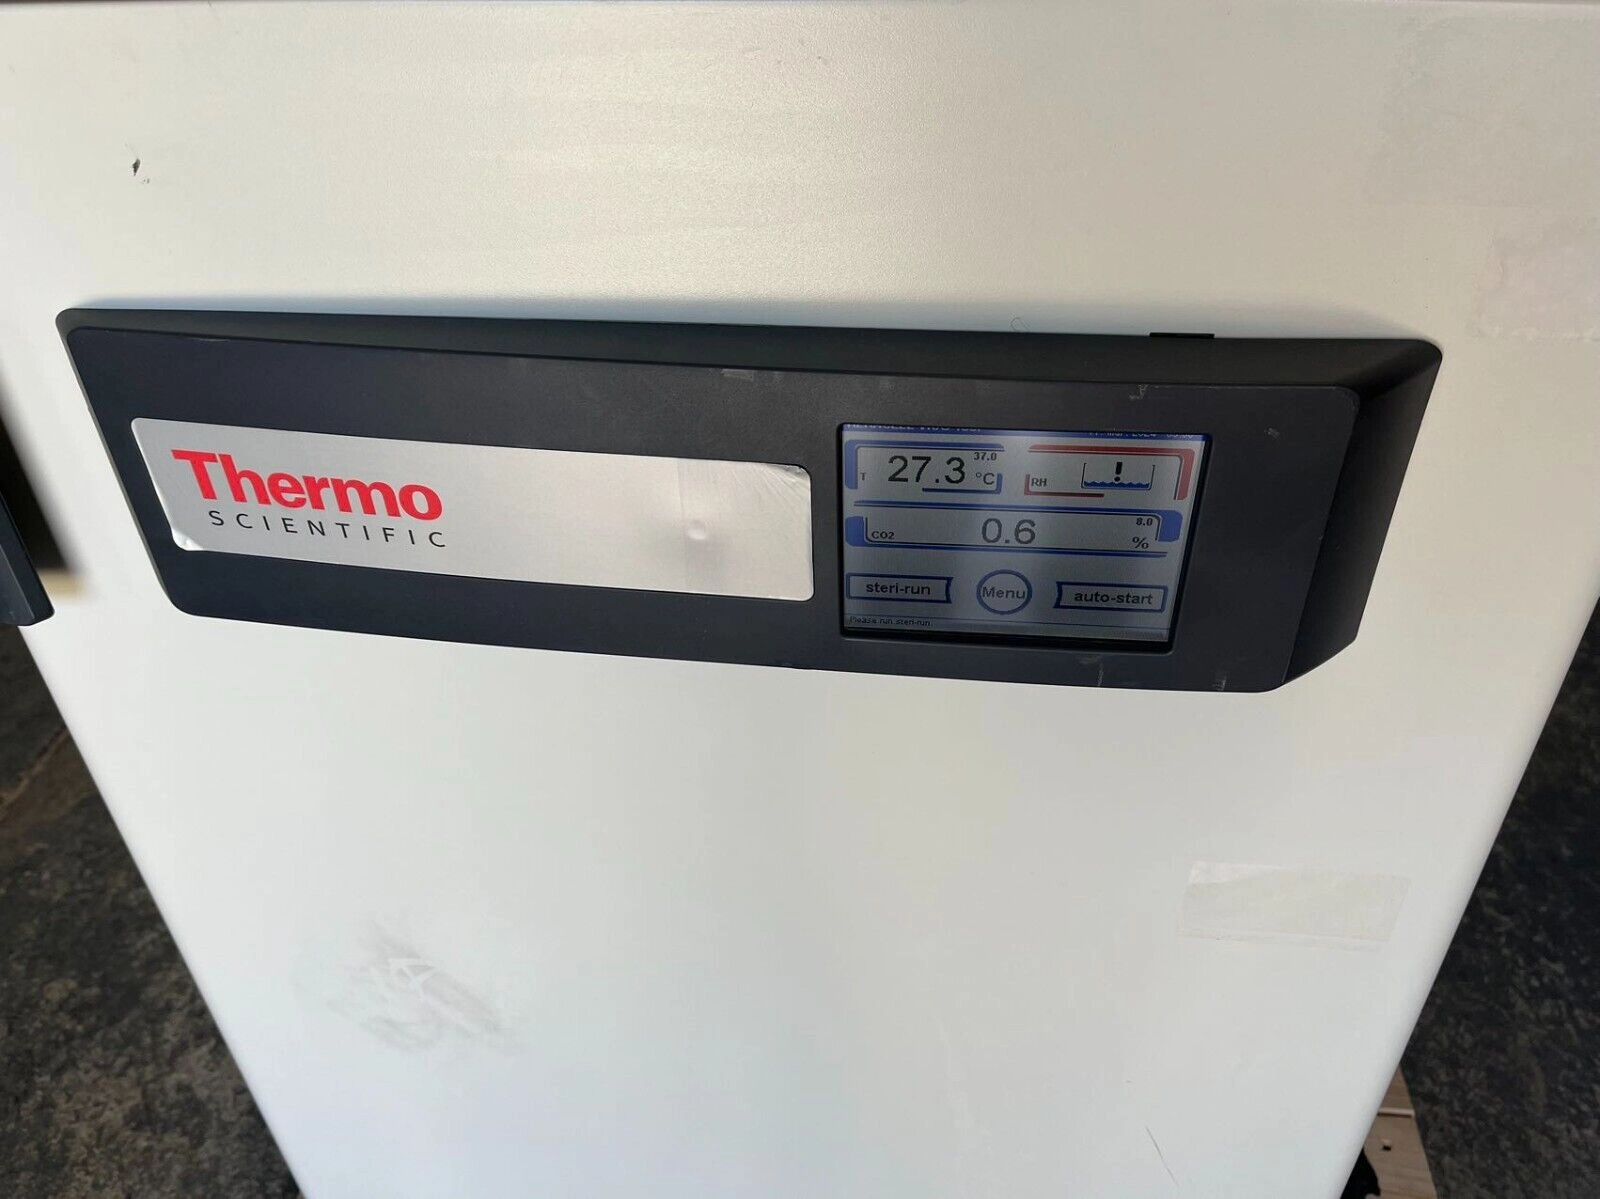 Thermo  Heracell™ VIOS 160i CO2 Incubator, 165 L, 